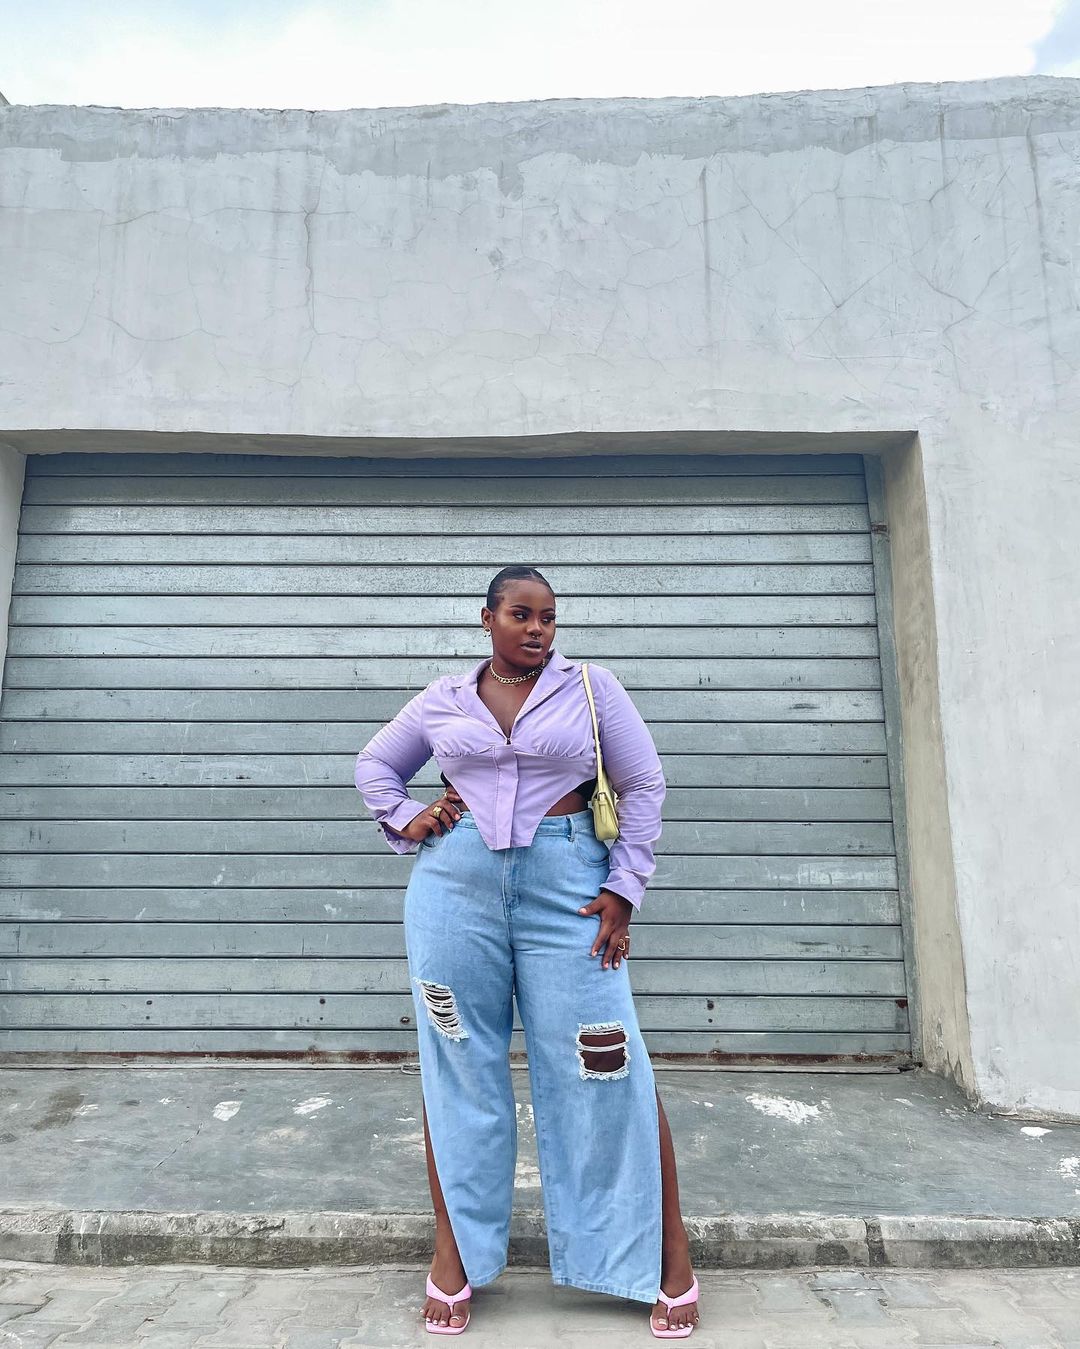 Ogechi Is All The Inspiration You Need For a Fabulous Curvy Style | BN ...